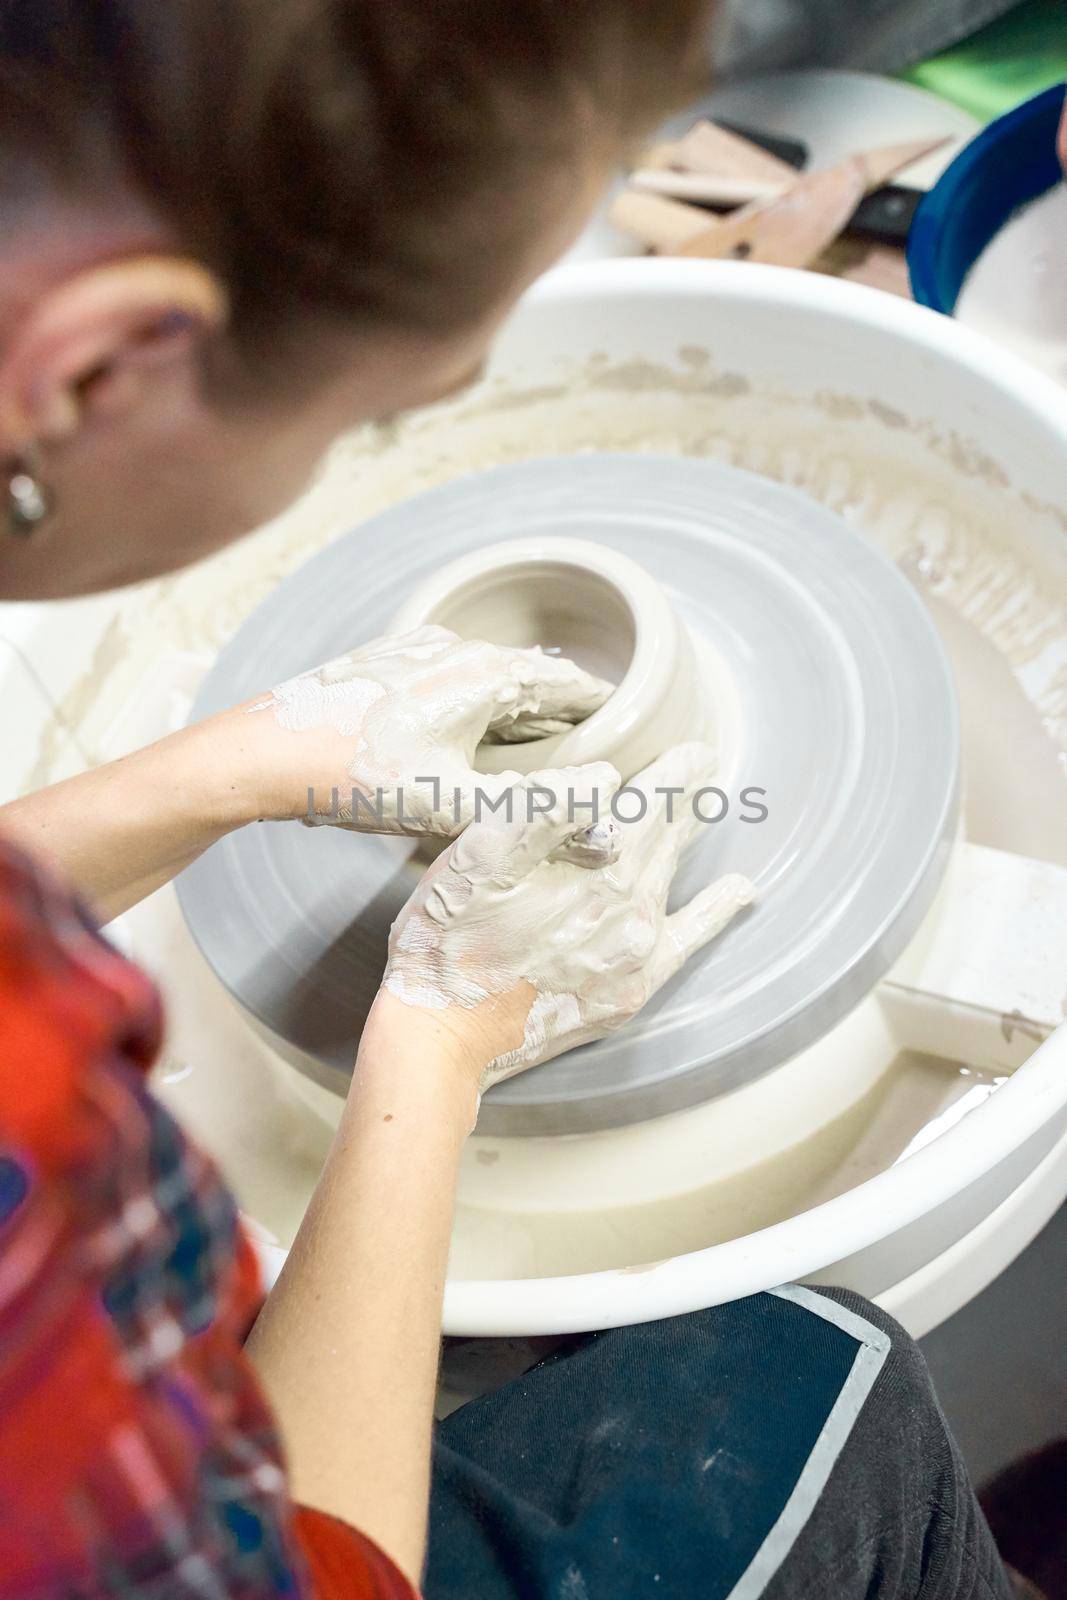 Woman making ceramic pottery on wheel, hands closeup. Concept for woman in freelance, business, creative hobby. Earn extra money, side hustle, vertical